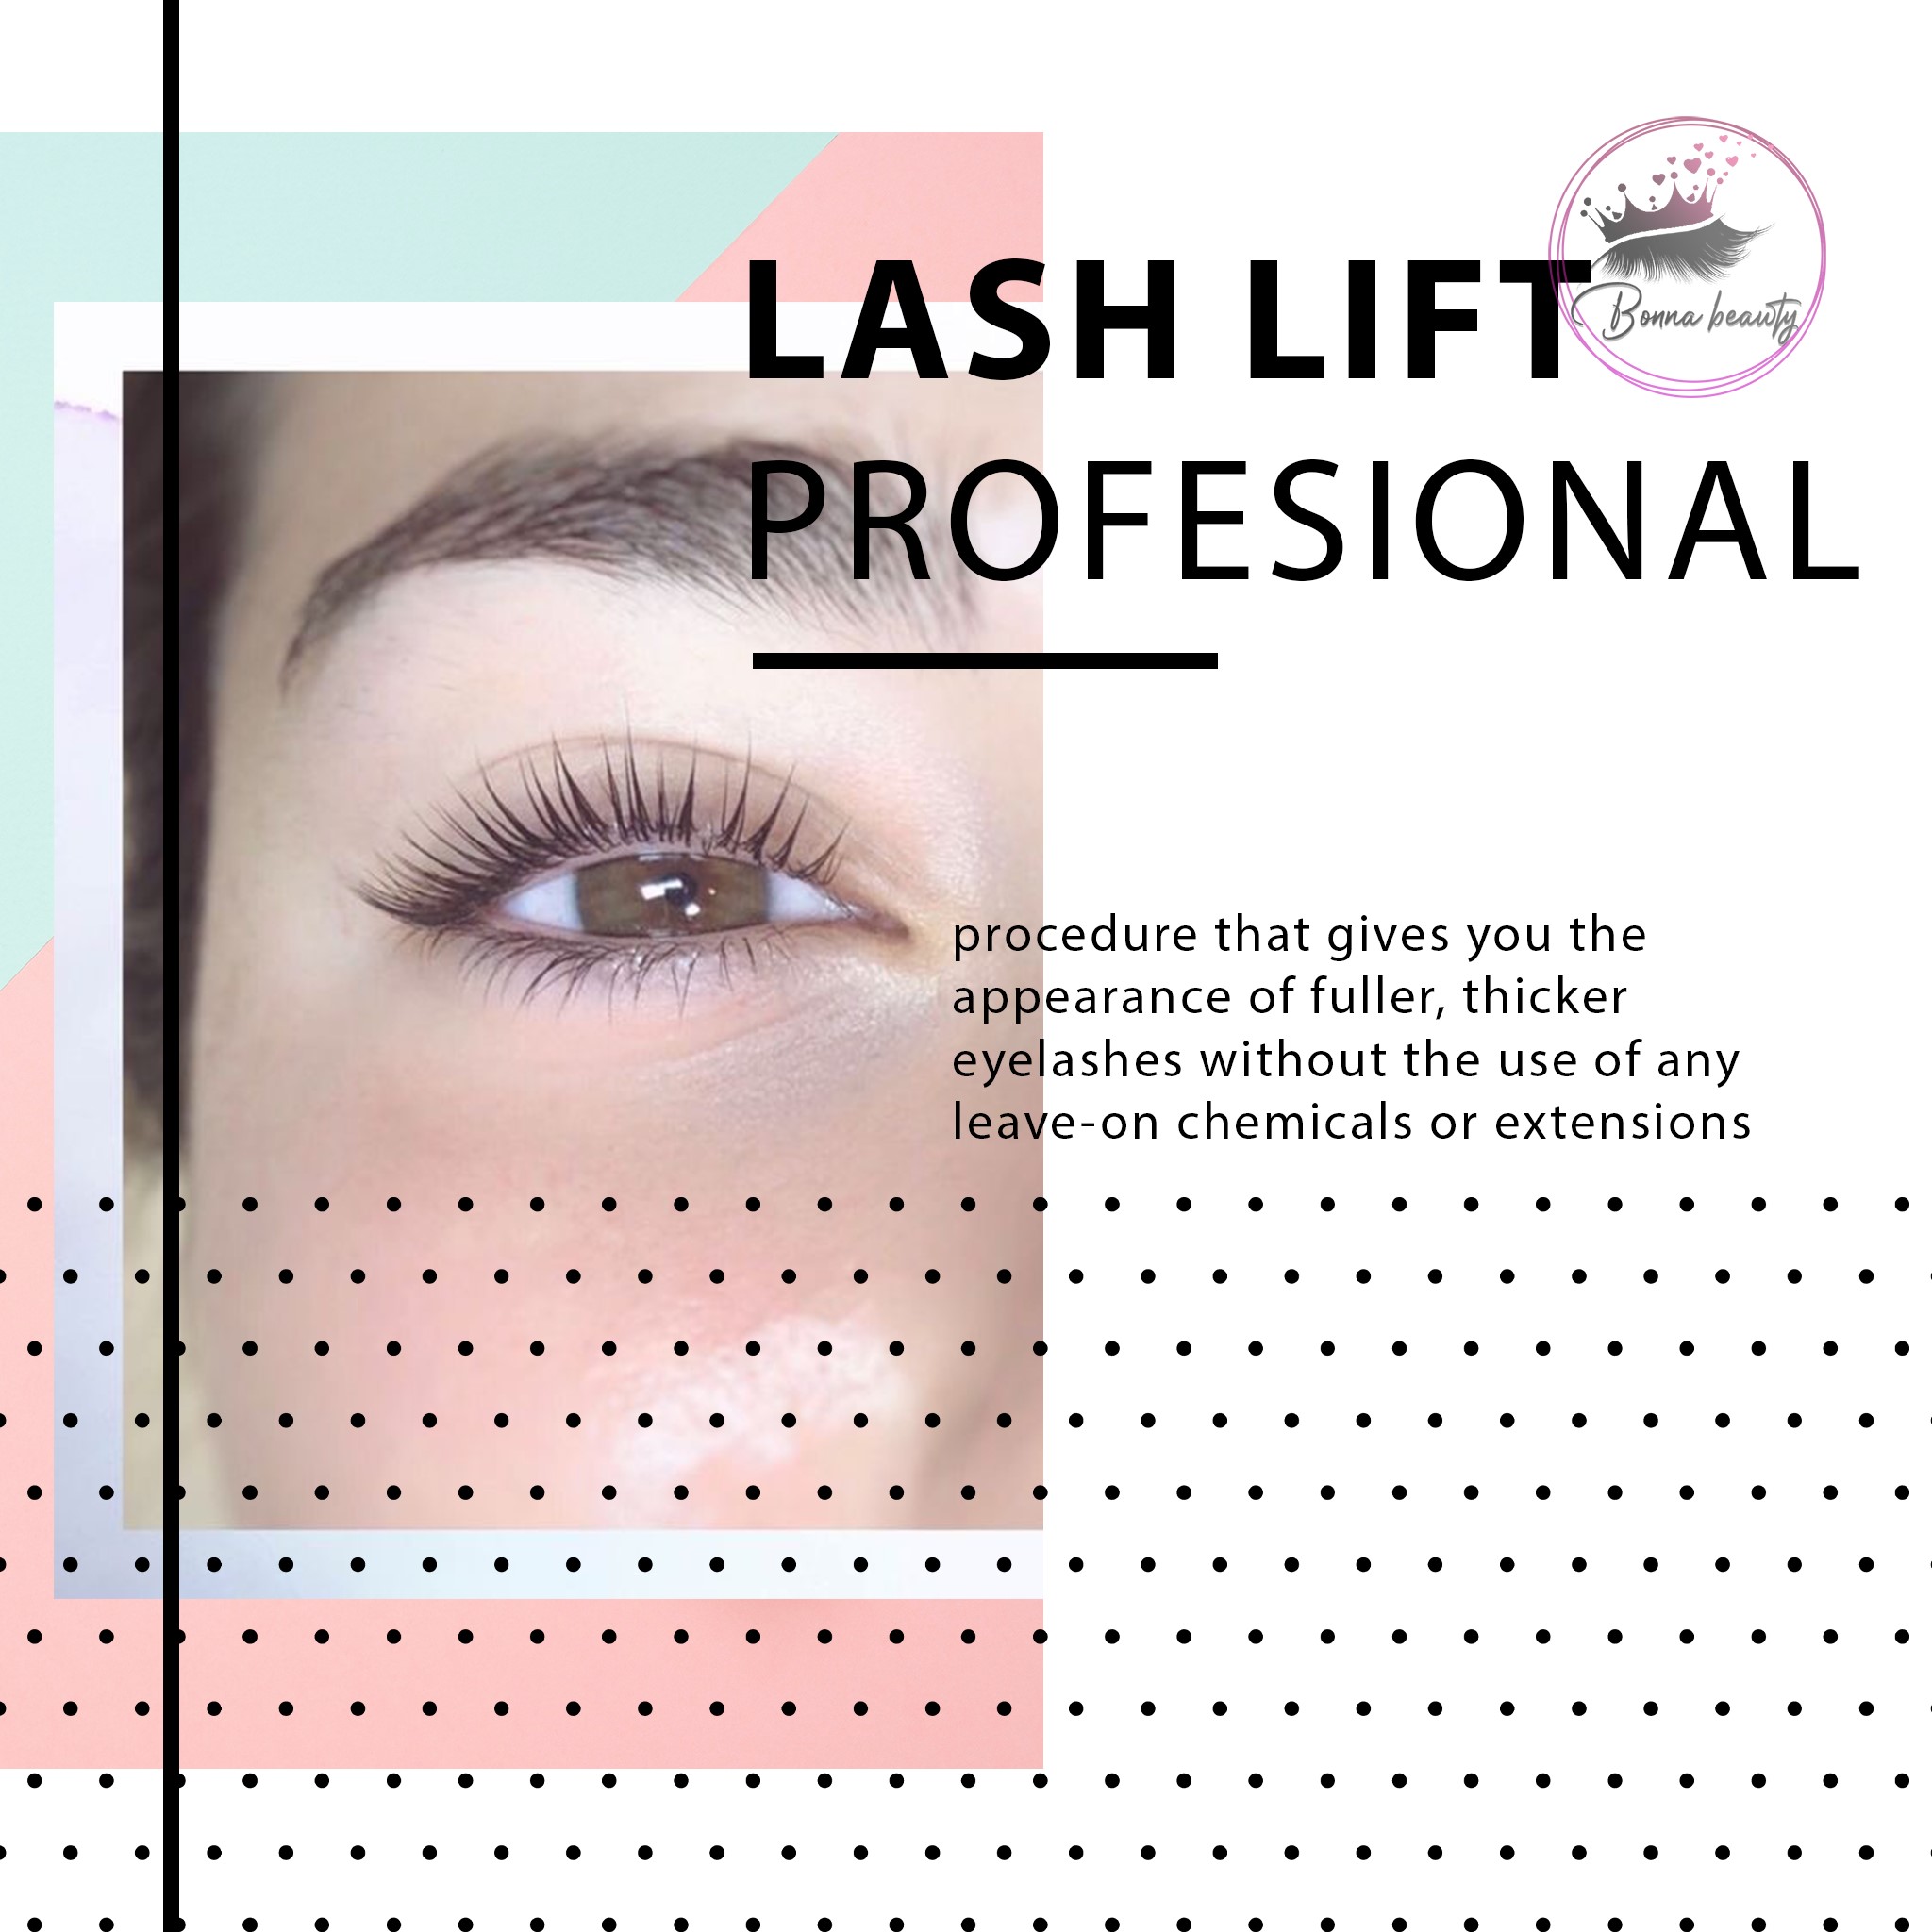 Lash Lift For 5 Different Eye Shapes: Tips And Techniques - Bonna